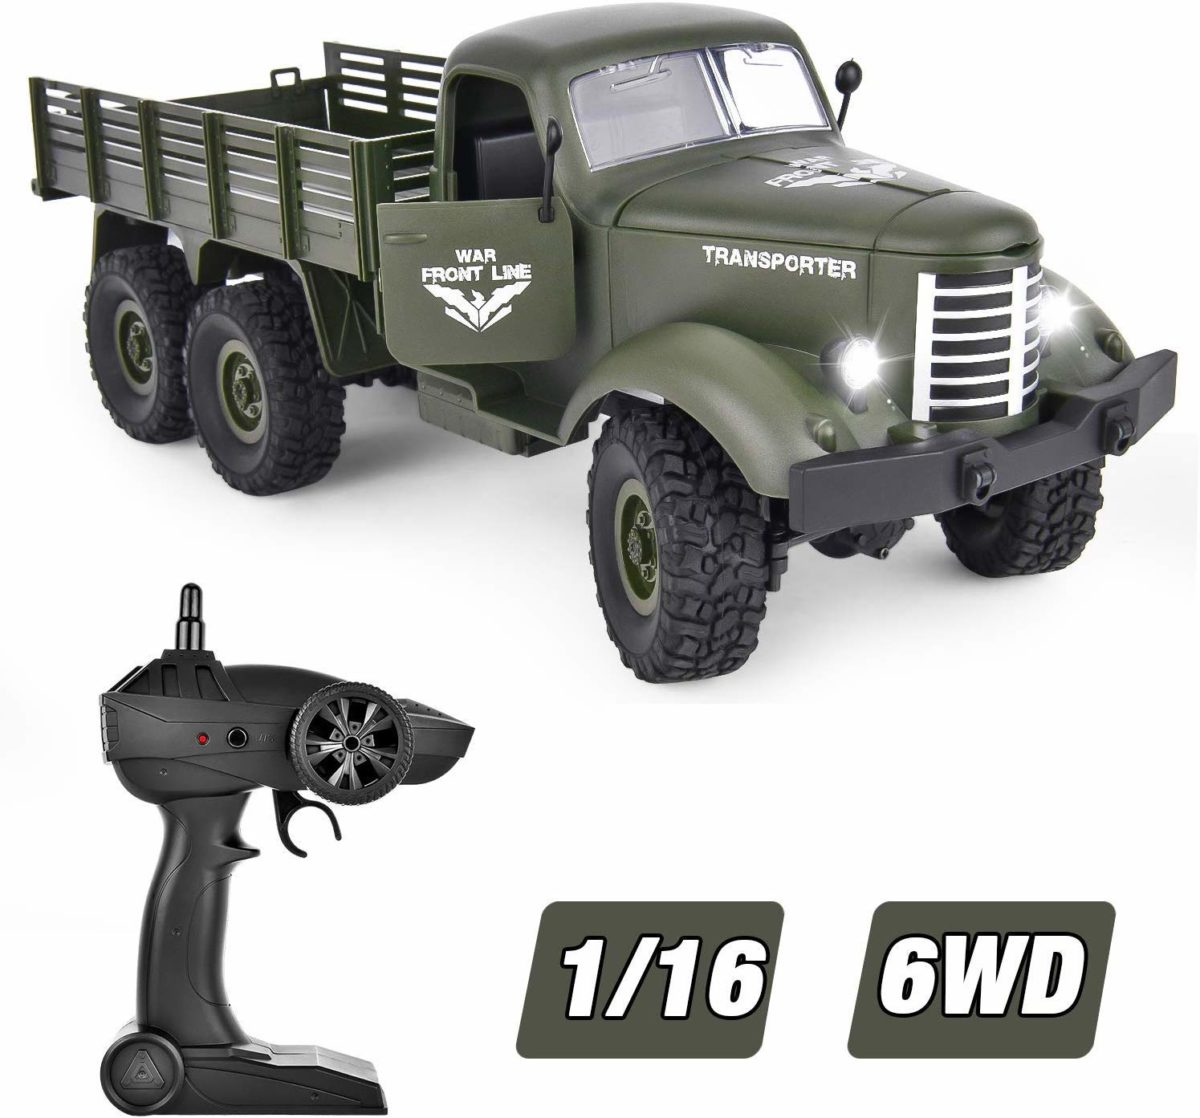 GotechoD RC Truck Remote Control Military Truck - Top Toys and Gifts for Six Year Old Boys 1